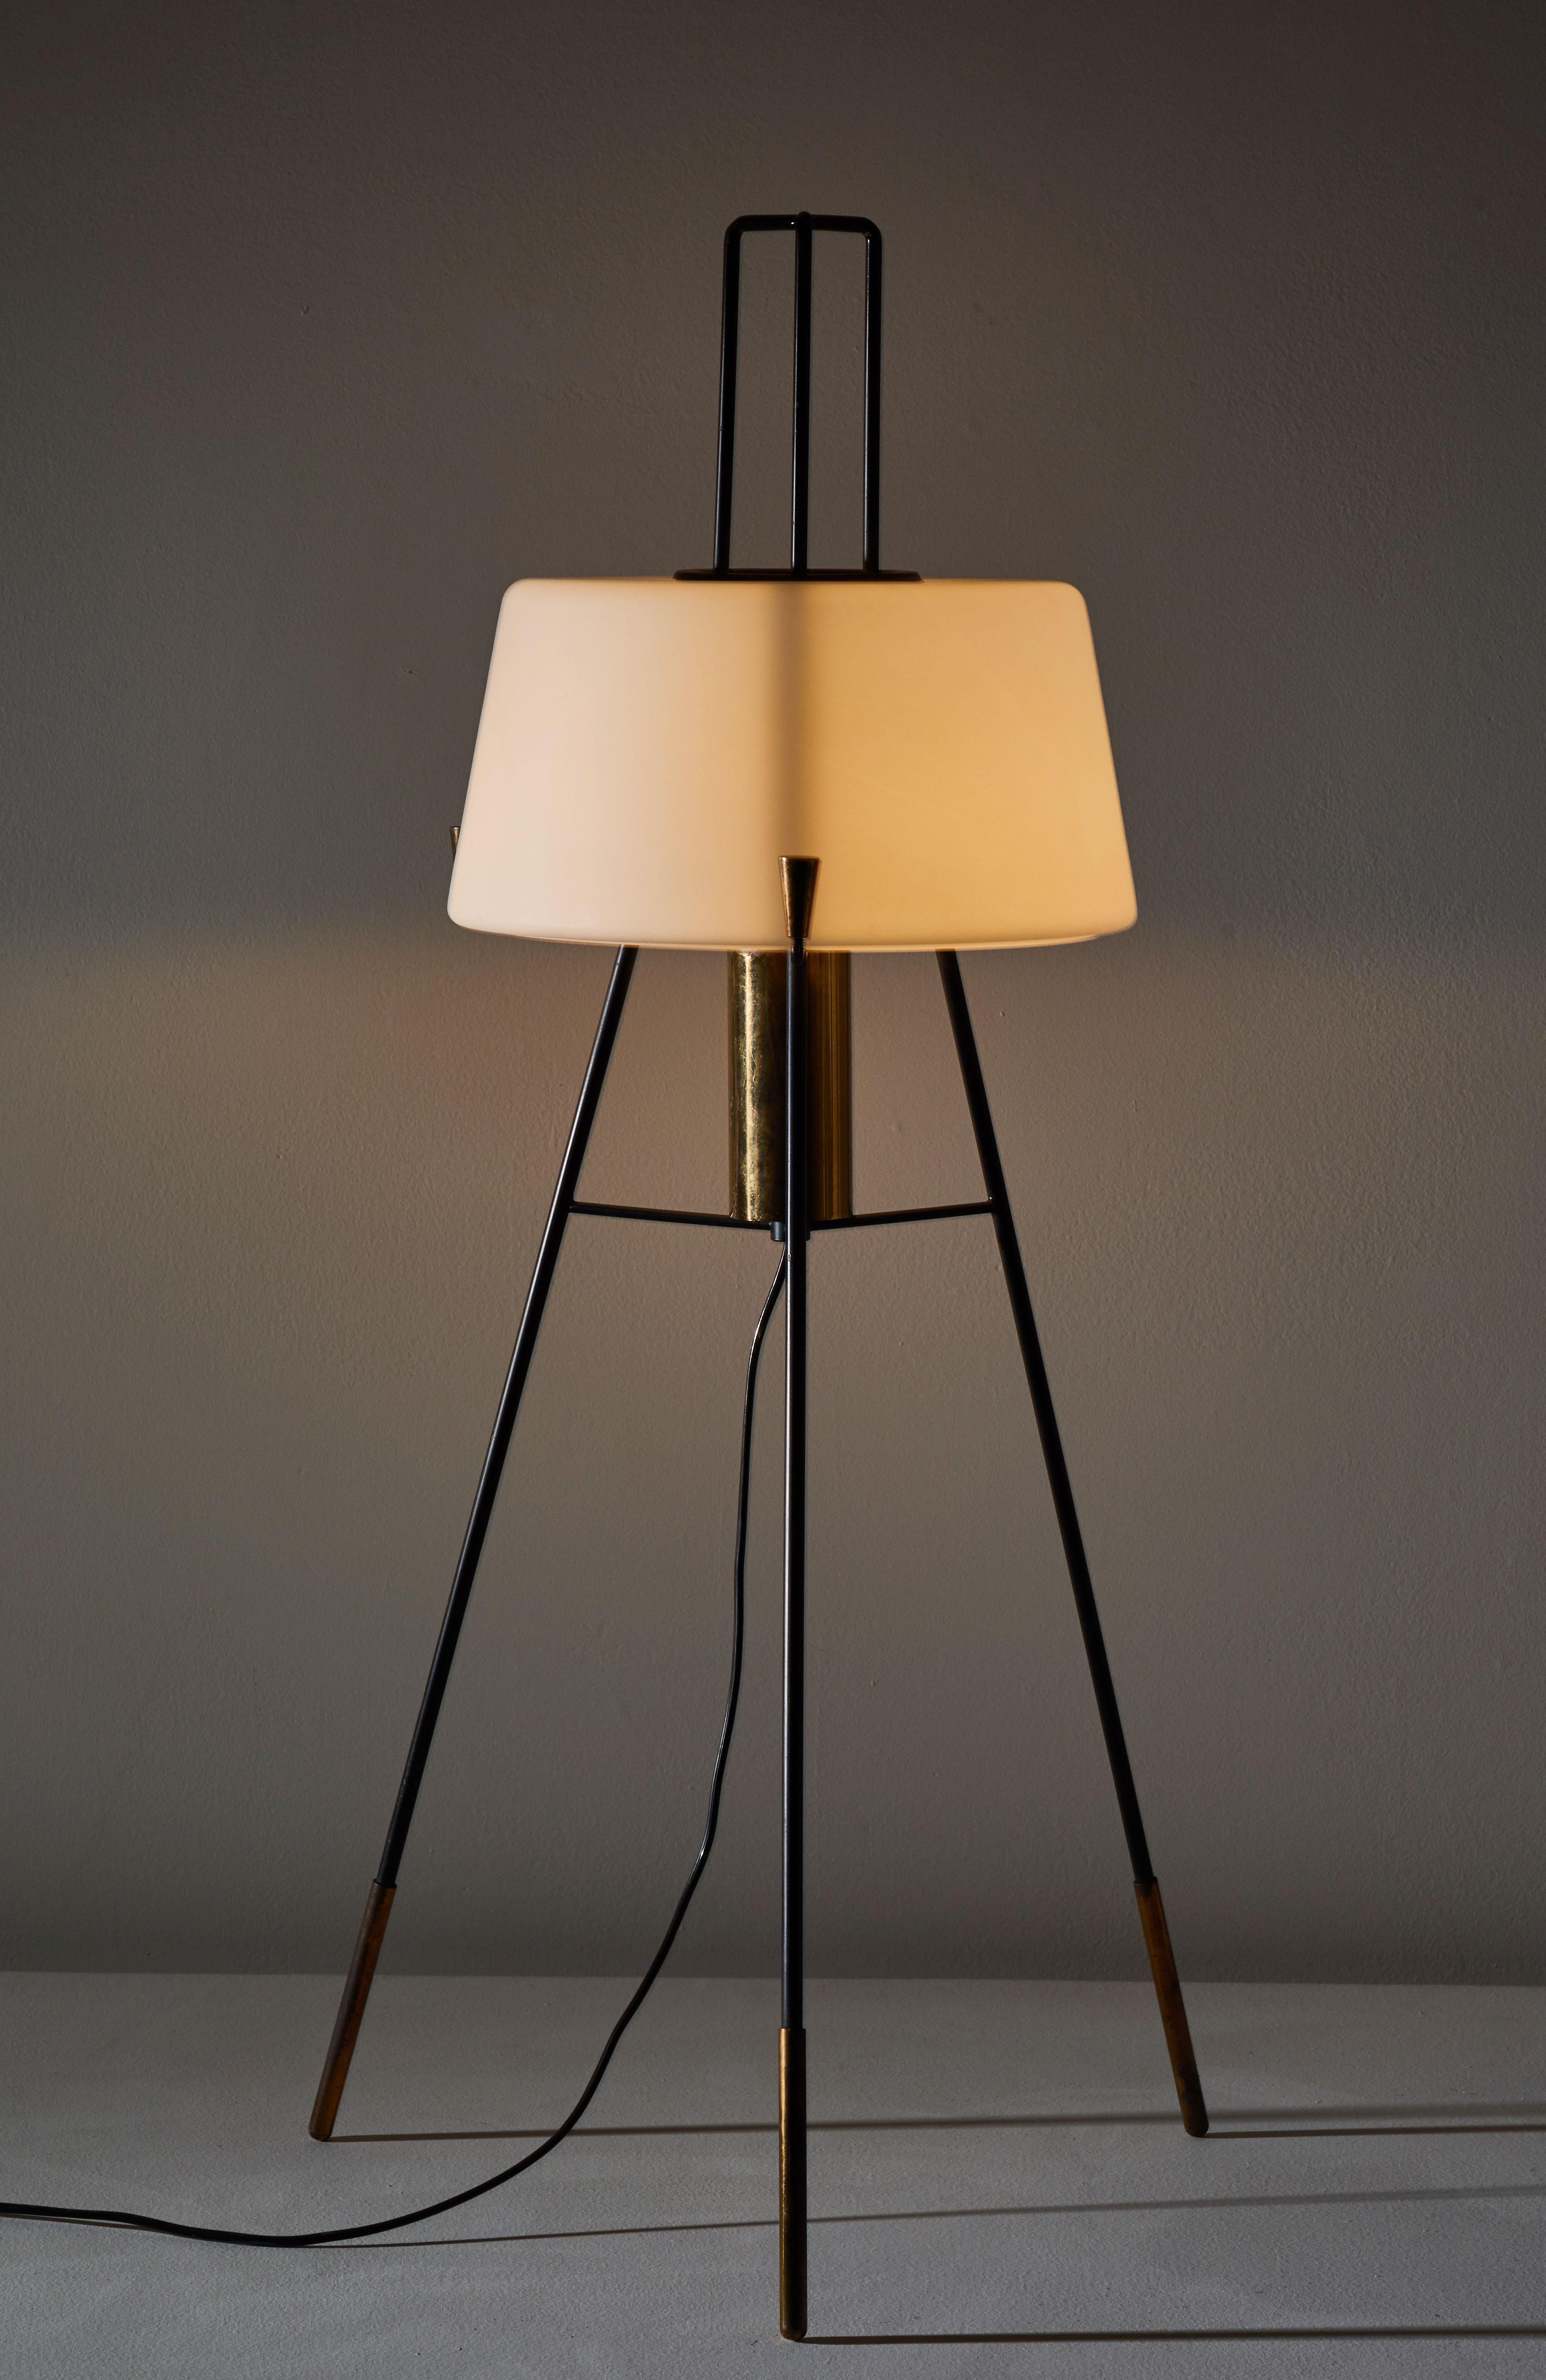 Floor lamp by Stilnovo. Manufactured in Italy, circa 1950s. Brushed satin glass diffuser, enameled metal tripod base, brass hardware. Original cord with brass step switch. Not wired for US, comes with adapter. Takes one E27 100w maximum bulb.